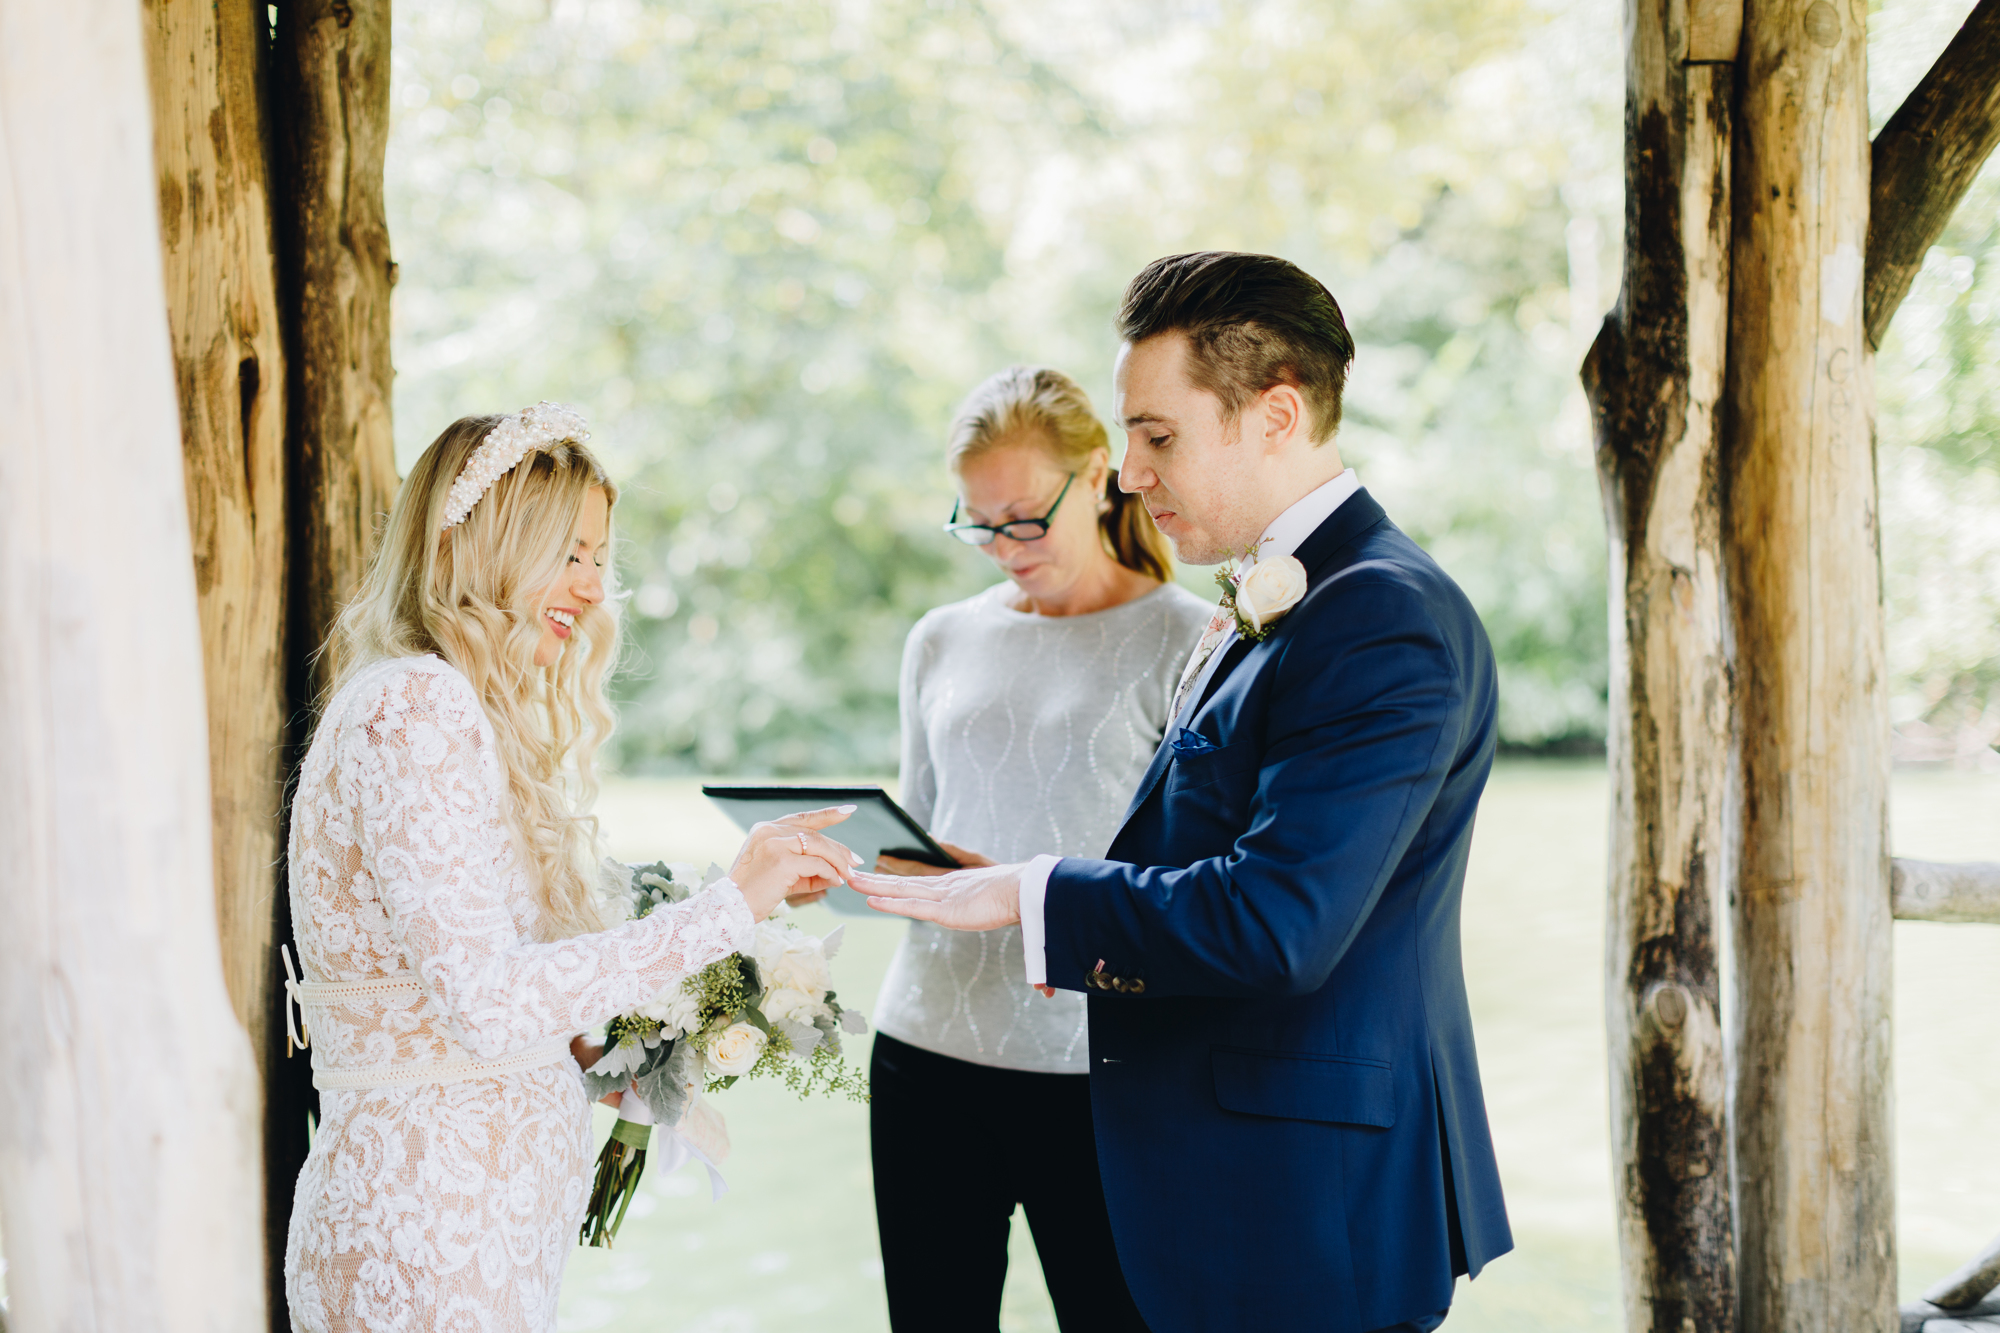 Small Wagner Cove Elopement in Central Park